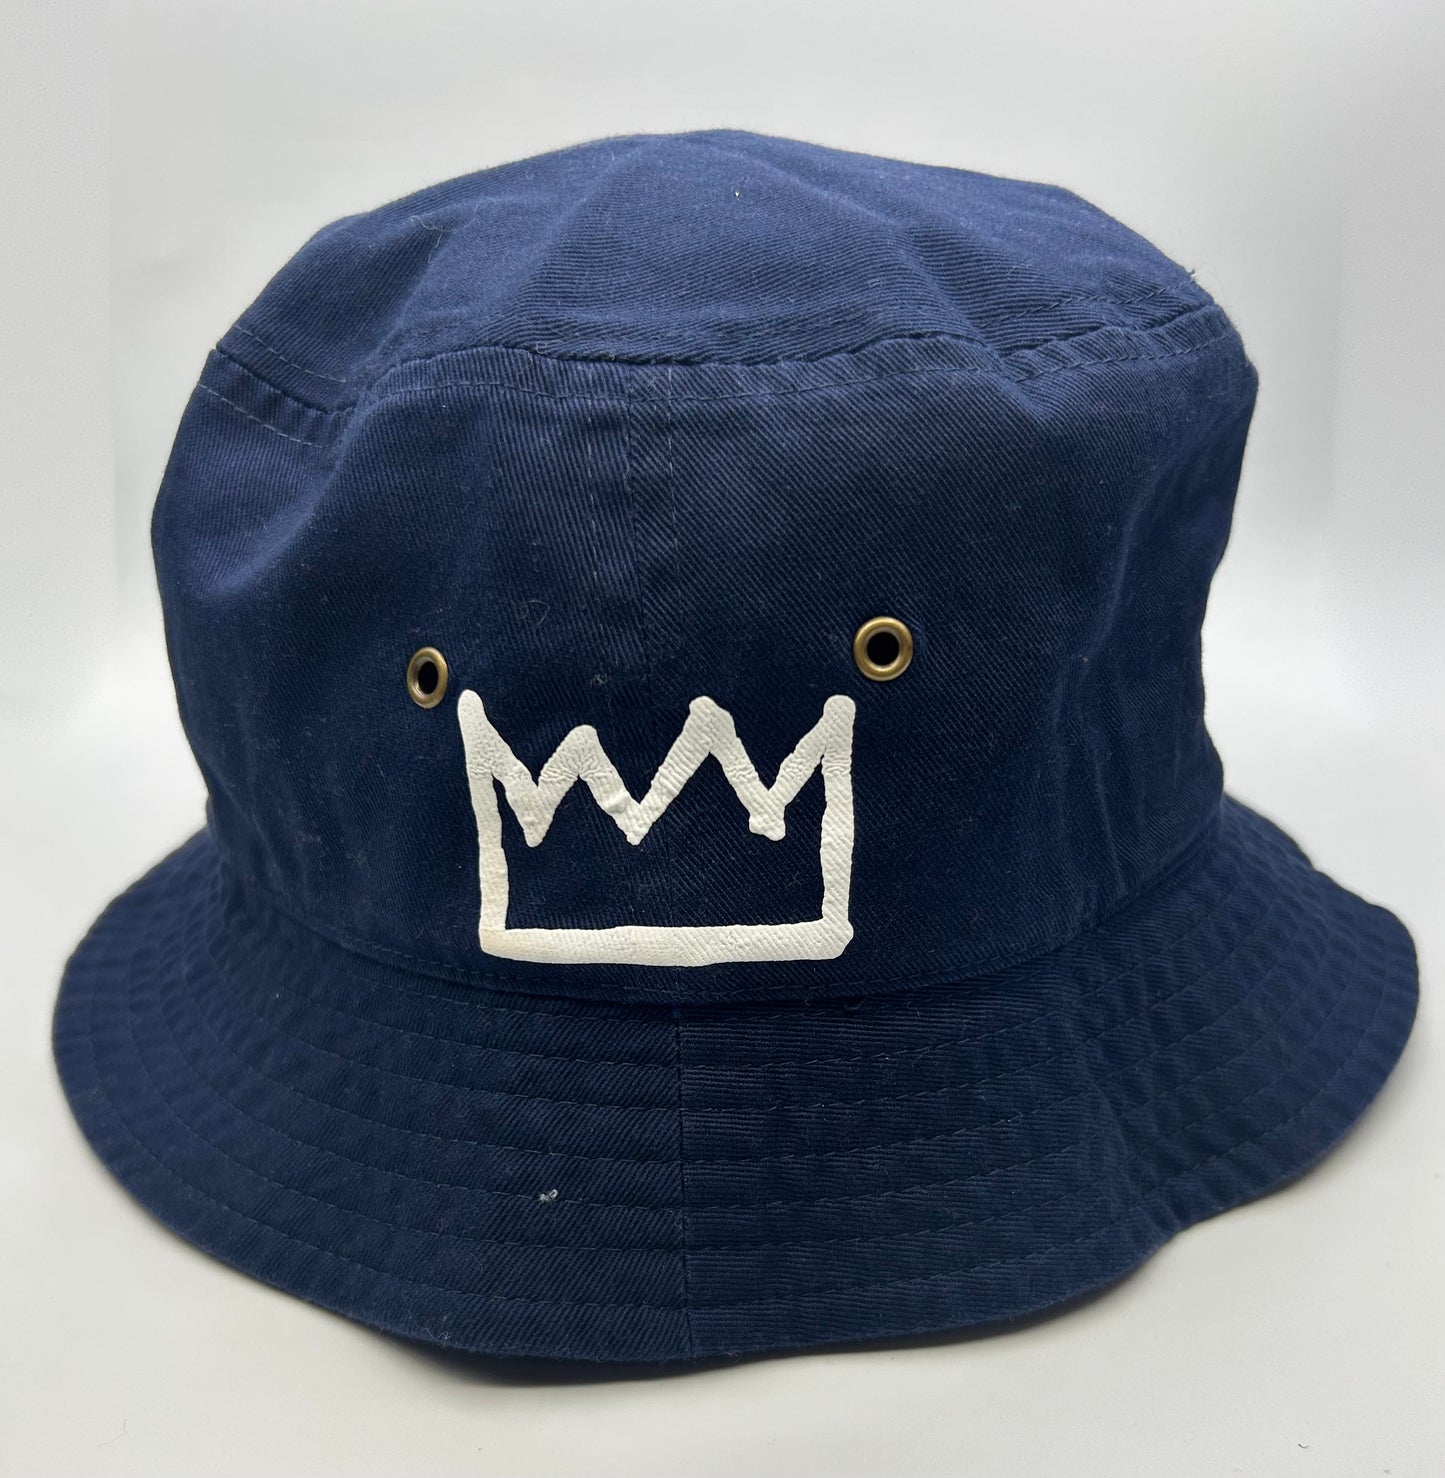 Navy Blue Bucket with White Krown